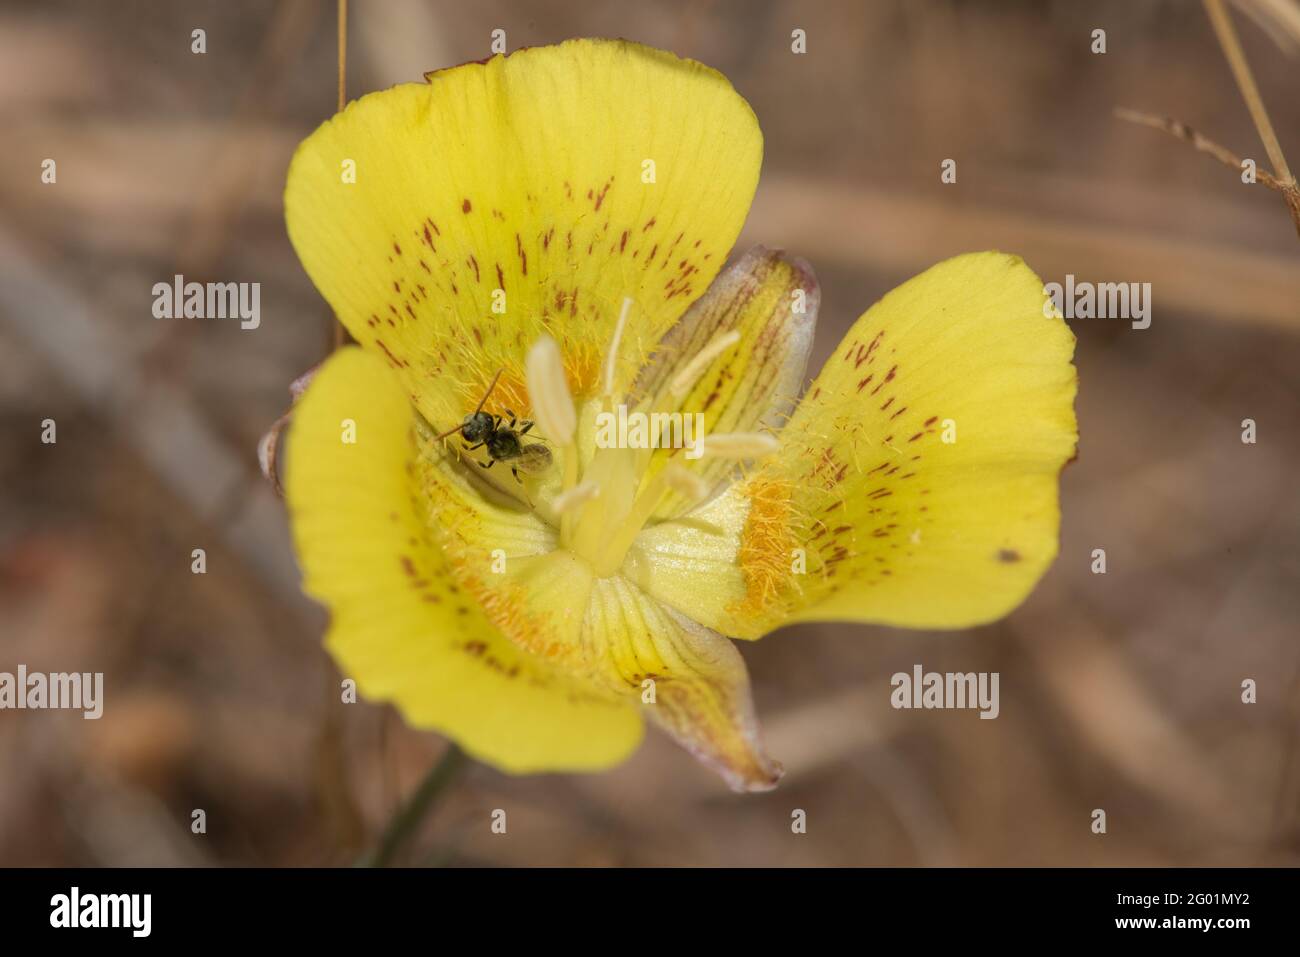 A small native bee species inside and pollinating a yellow Mariposa lily (Calochortus luteus) in Henry Coe state park, California. Stock Photo